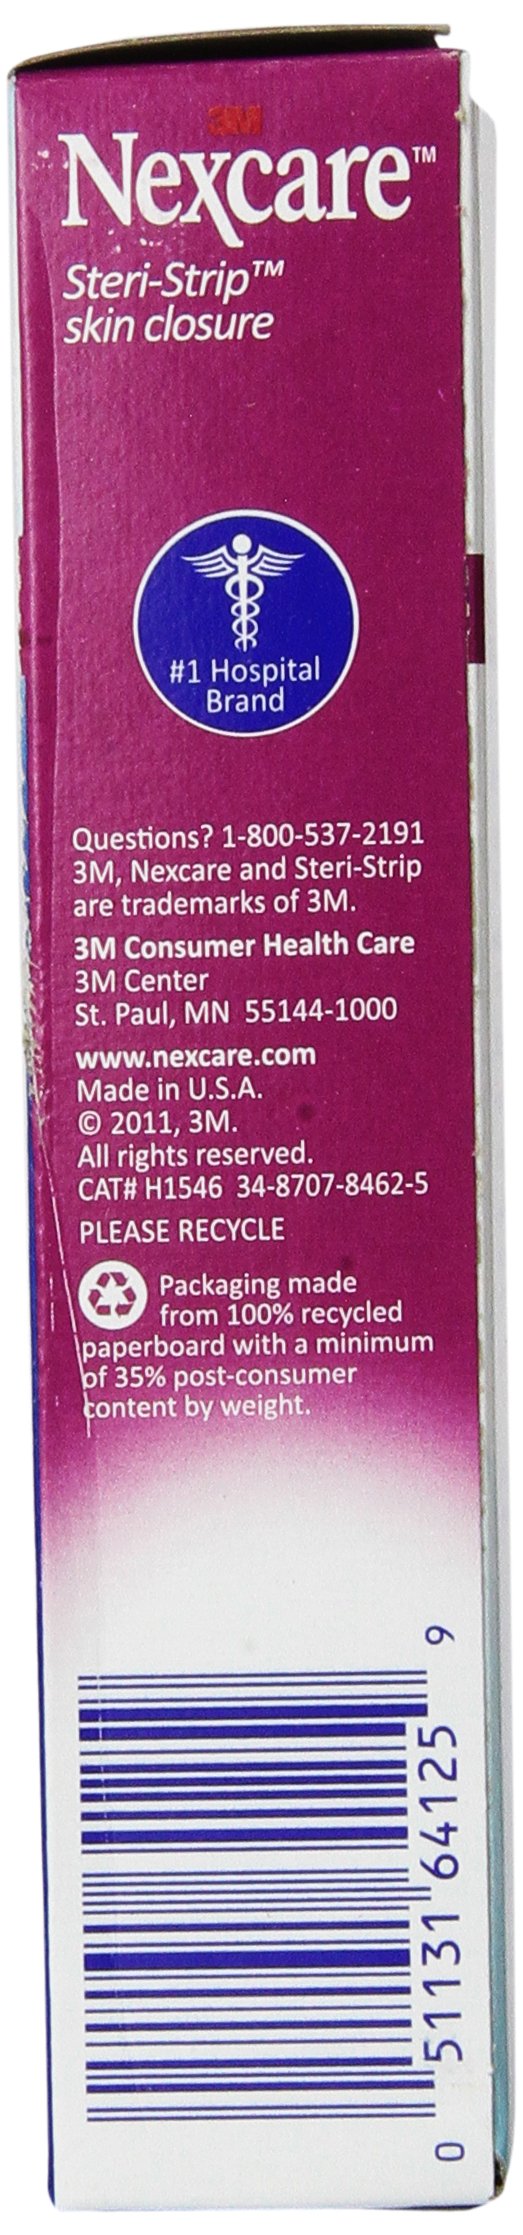 Nexcare Steri-Strip Wound Closure, Secures and closes small cuts and wounds, 1/4 Inch x 4 Inch, 30 Count